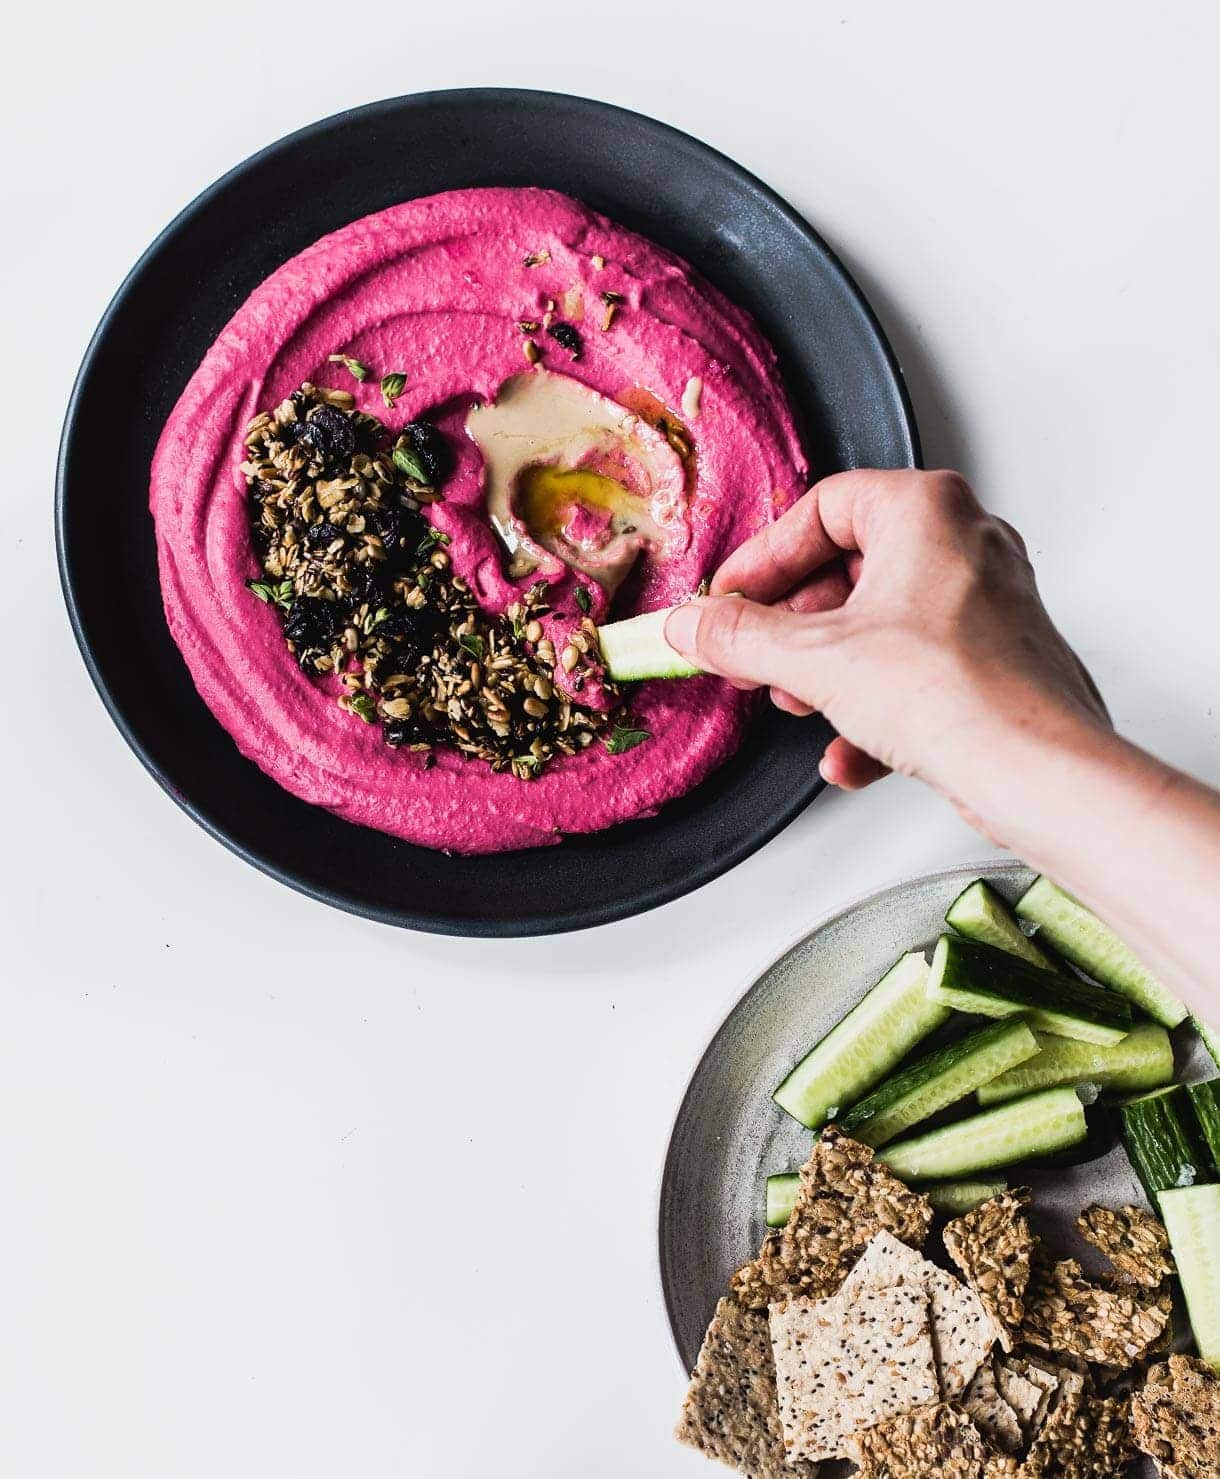 Creamy Beet Hummus with Seedy Oat Topping